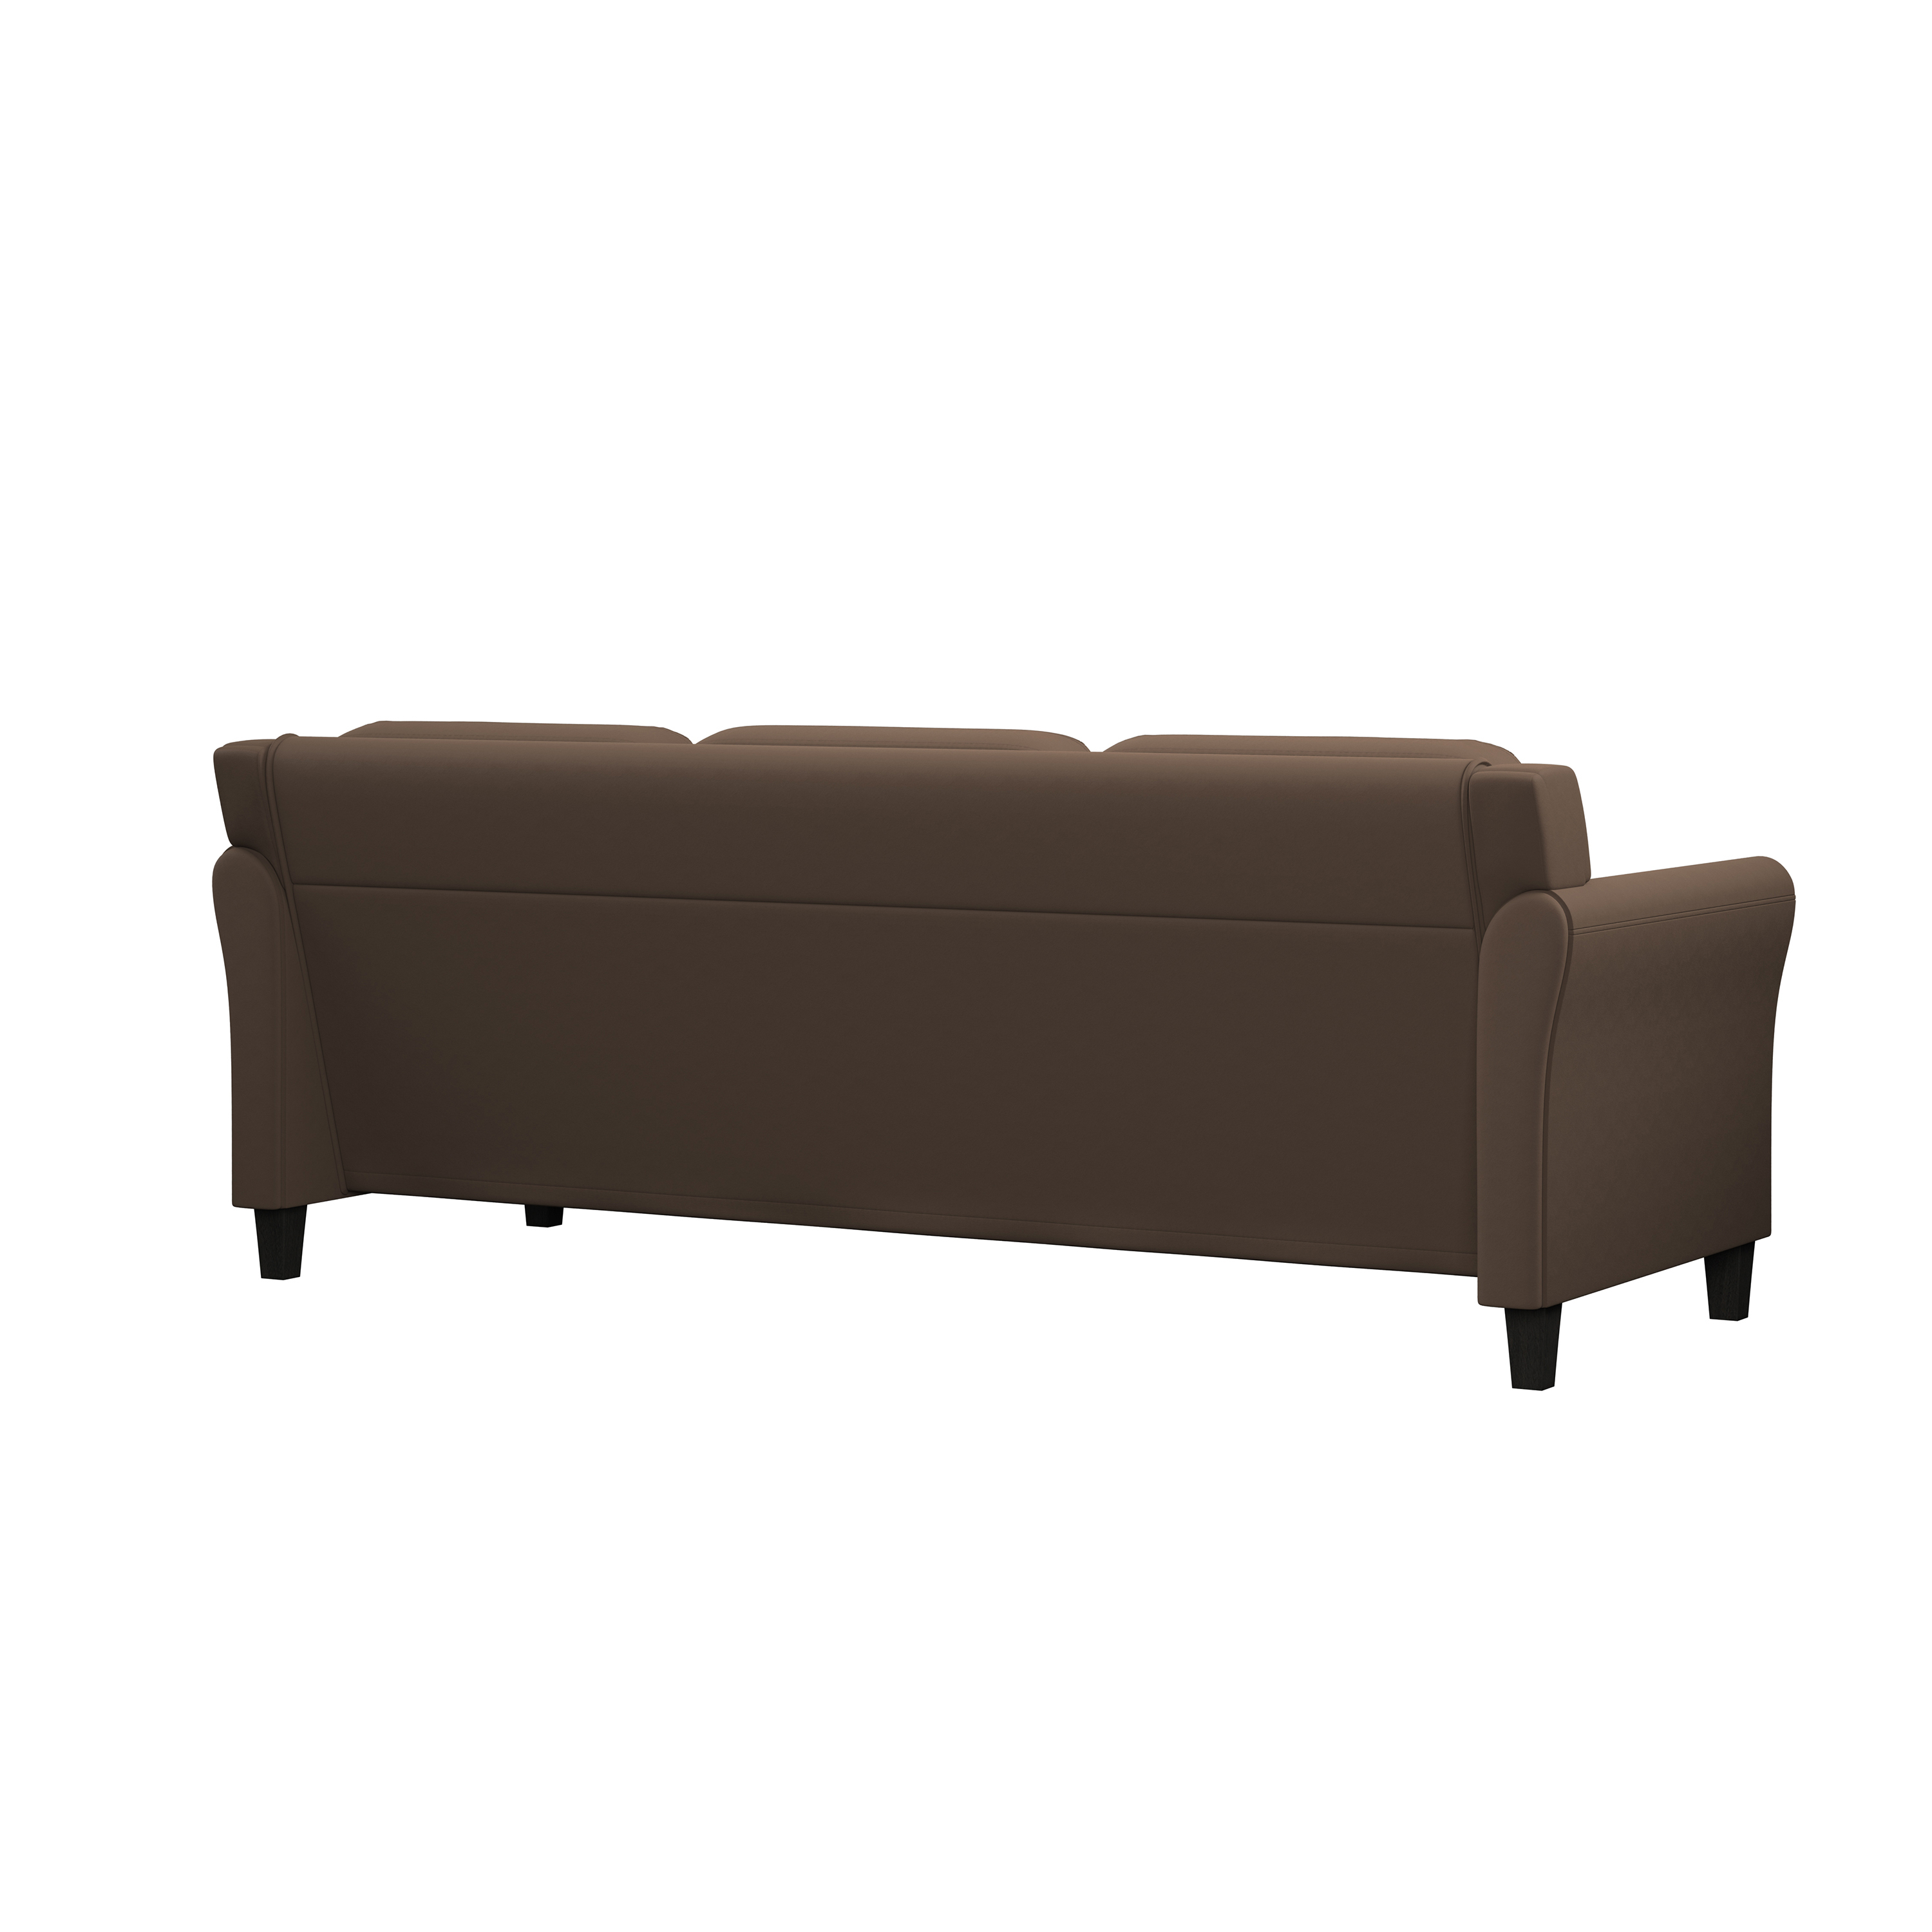 Lifestyle Solutions Taryn Traditional Sofa with Rolled Arms, Brown Fabric - image 4 of 12